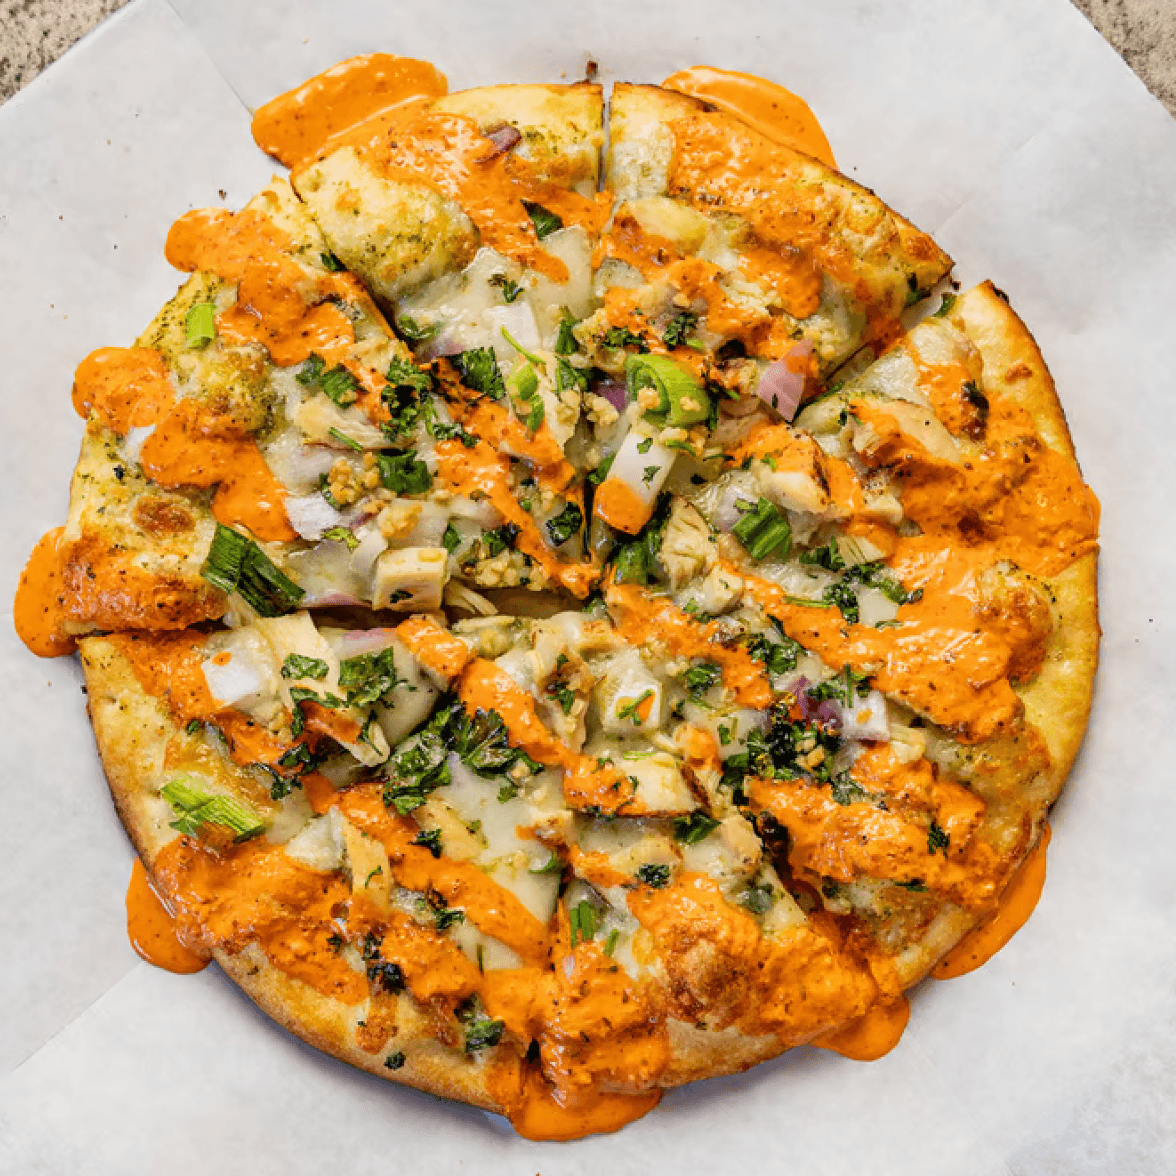 We offer the pizza revolution you've been waiting for!